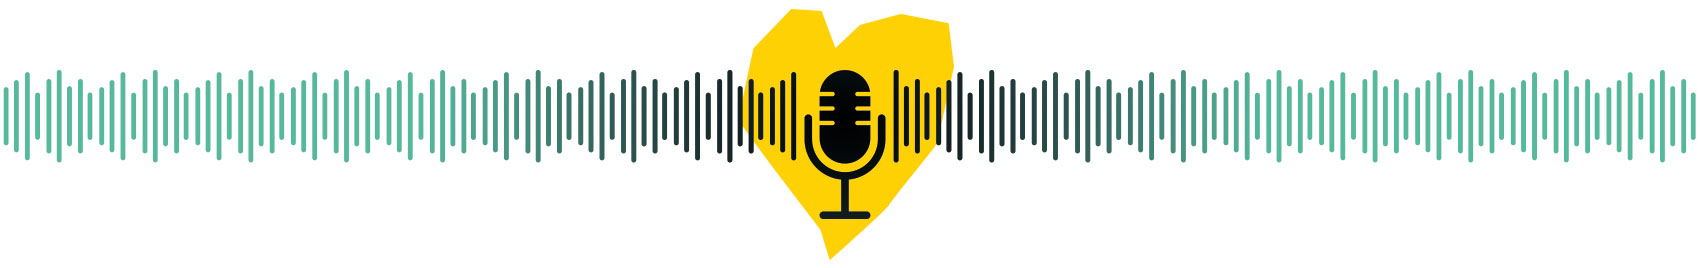 Microphone/podcast logo